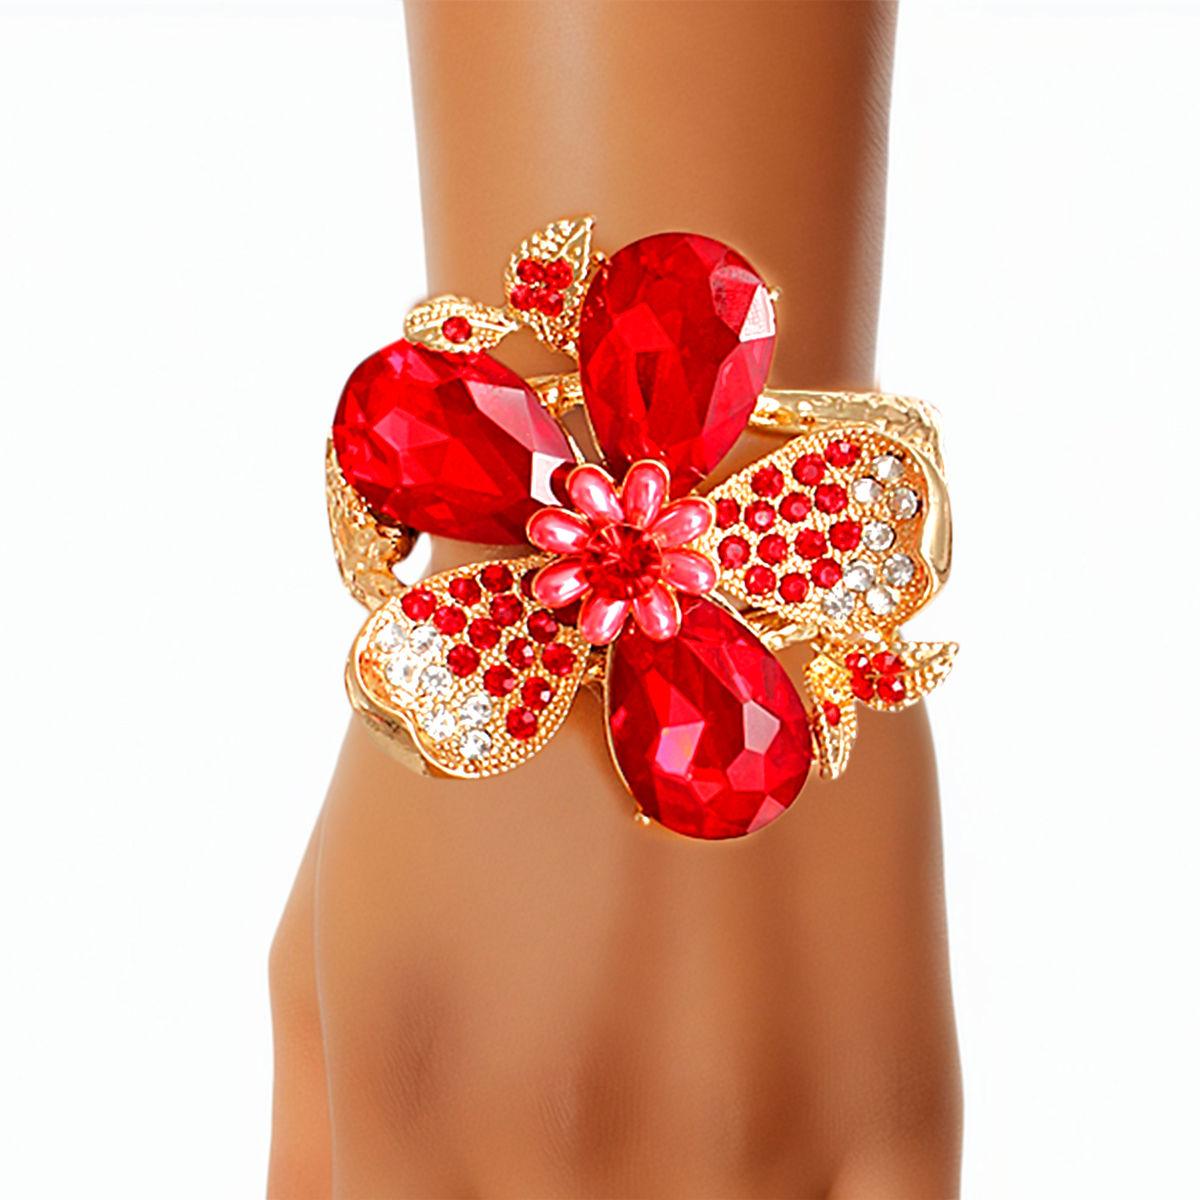 Lush Red/Gold Flower Bracelet to Adorn Your Wrist